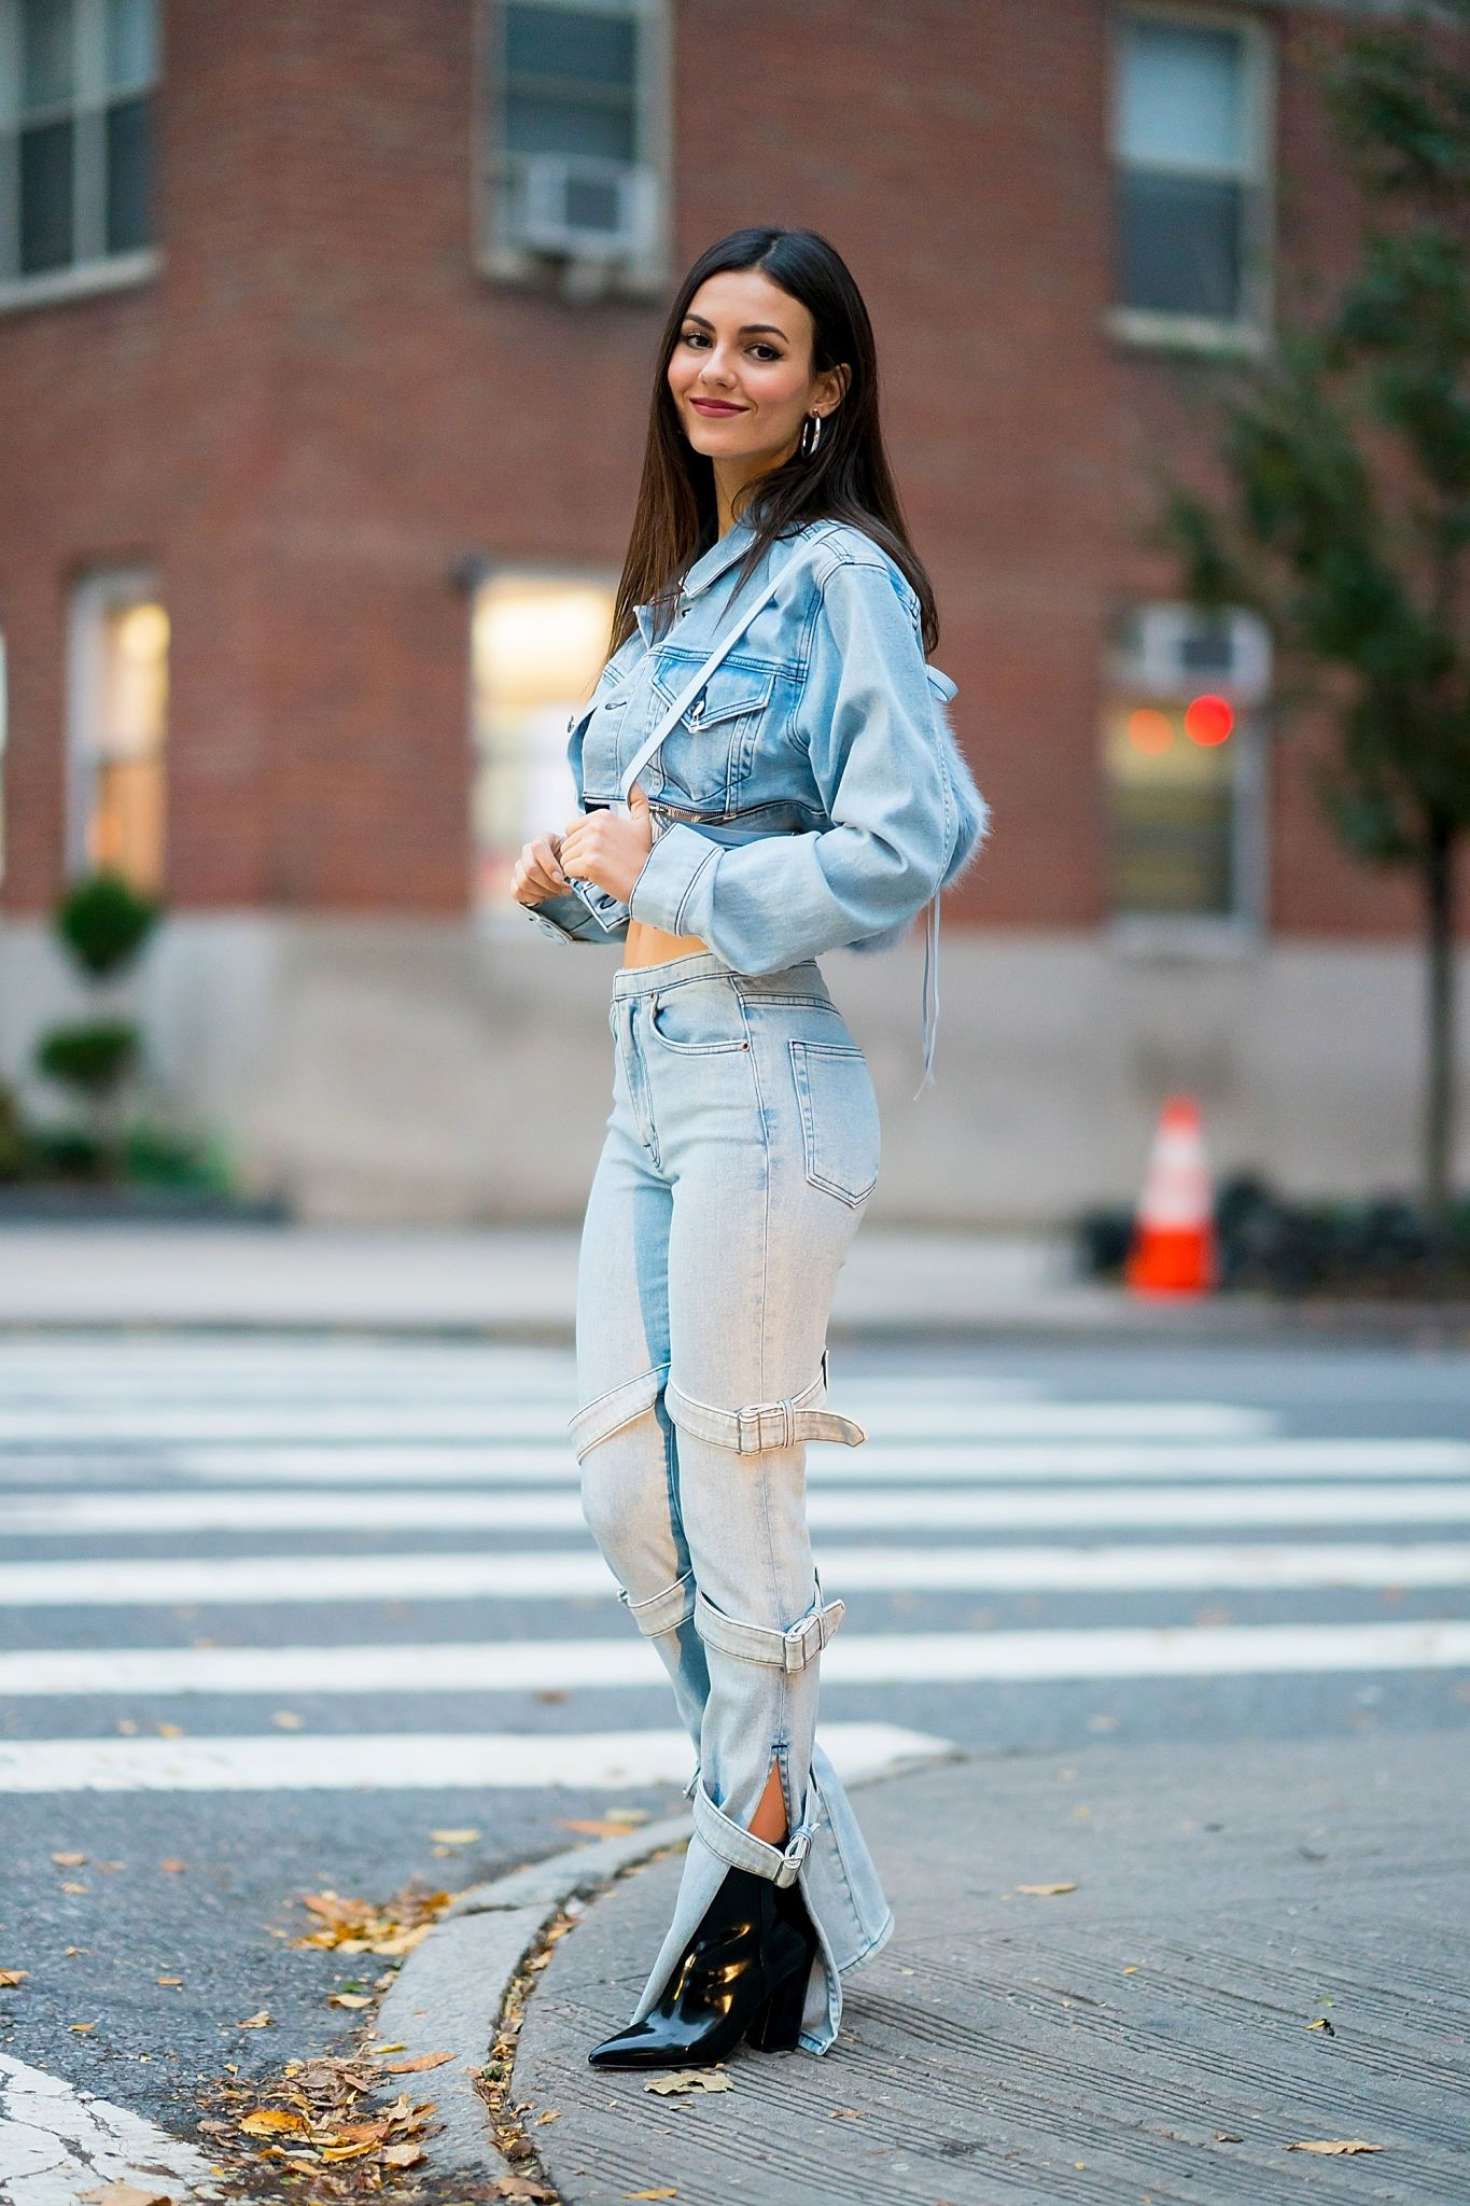 Victoria Justice in Denim Outfit â€“ Out and about in NYC